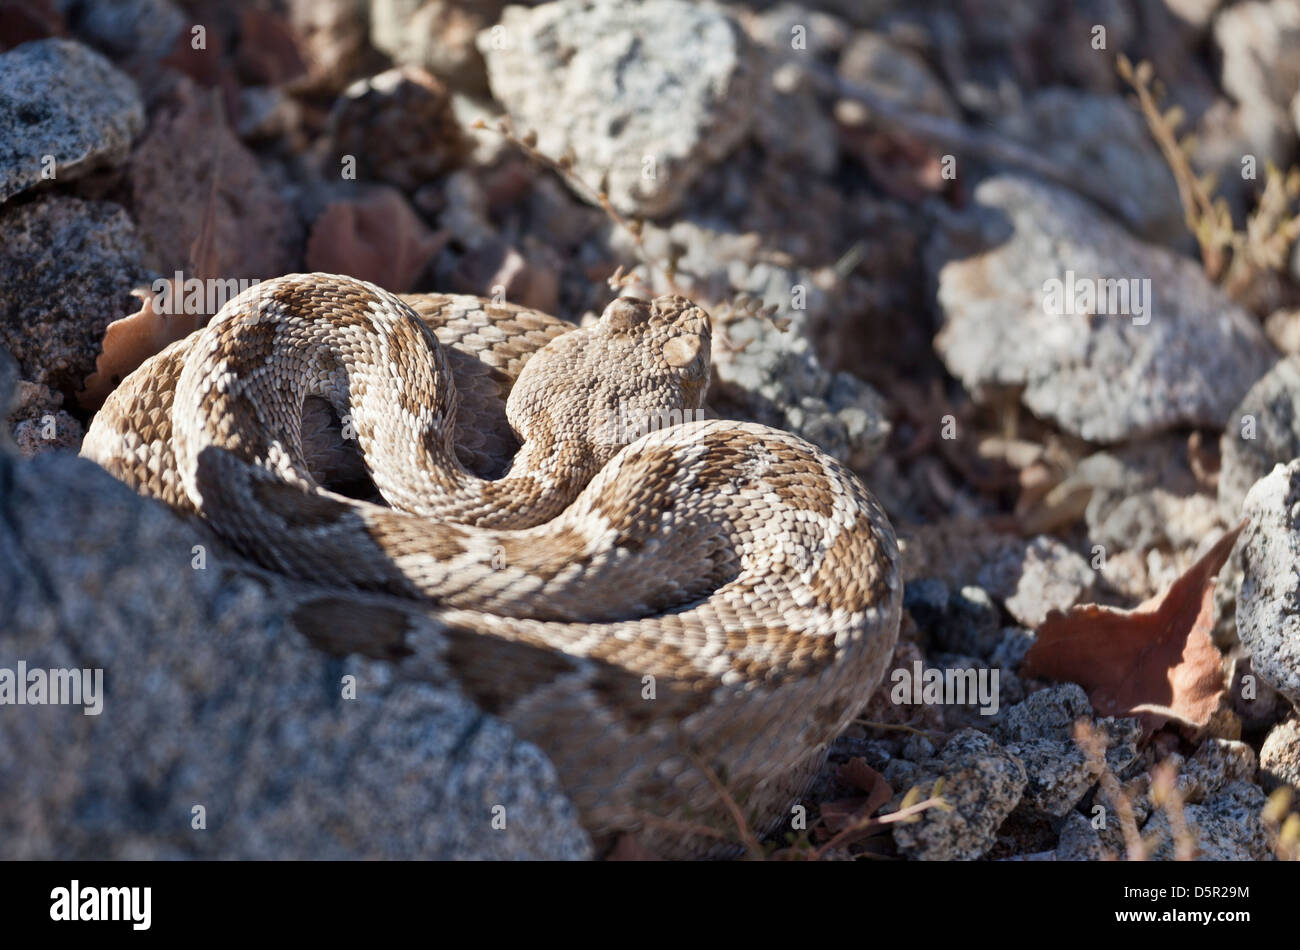 Rattleless Rattlesnake, Crotalus catalinensis, a pitviper endemic to Isla Santa Catalina in Mexico's Sea of Cortez, Endangered Stock Photo